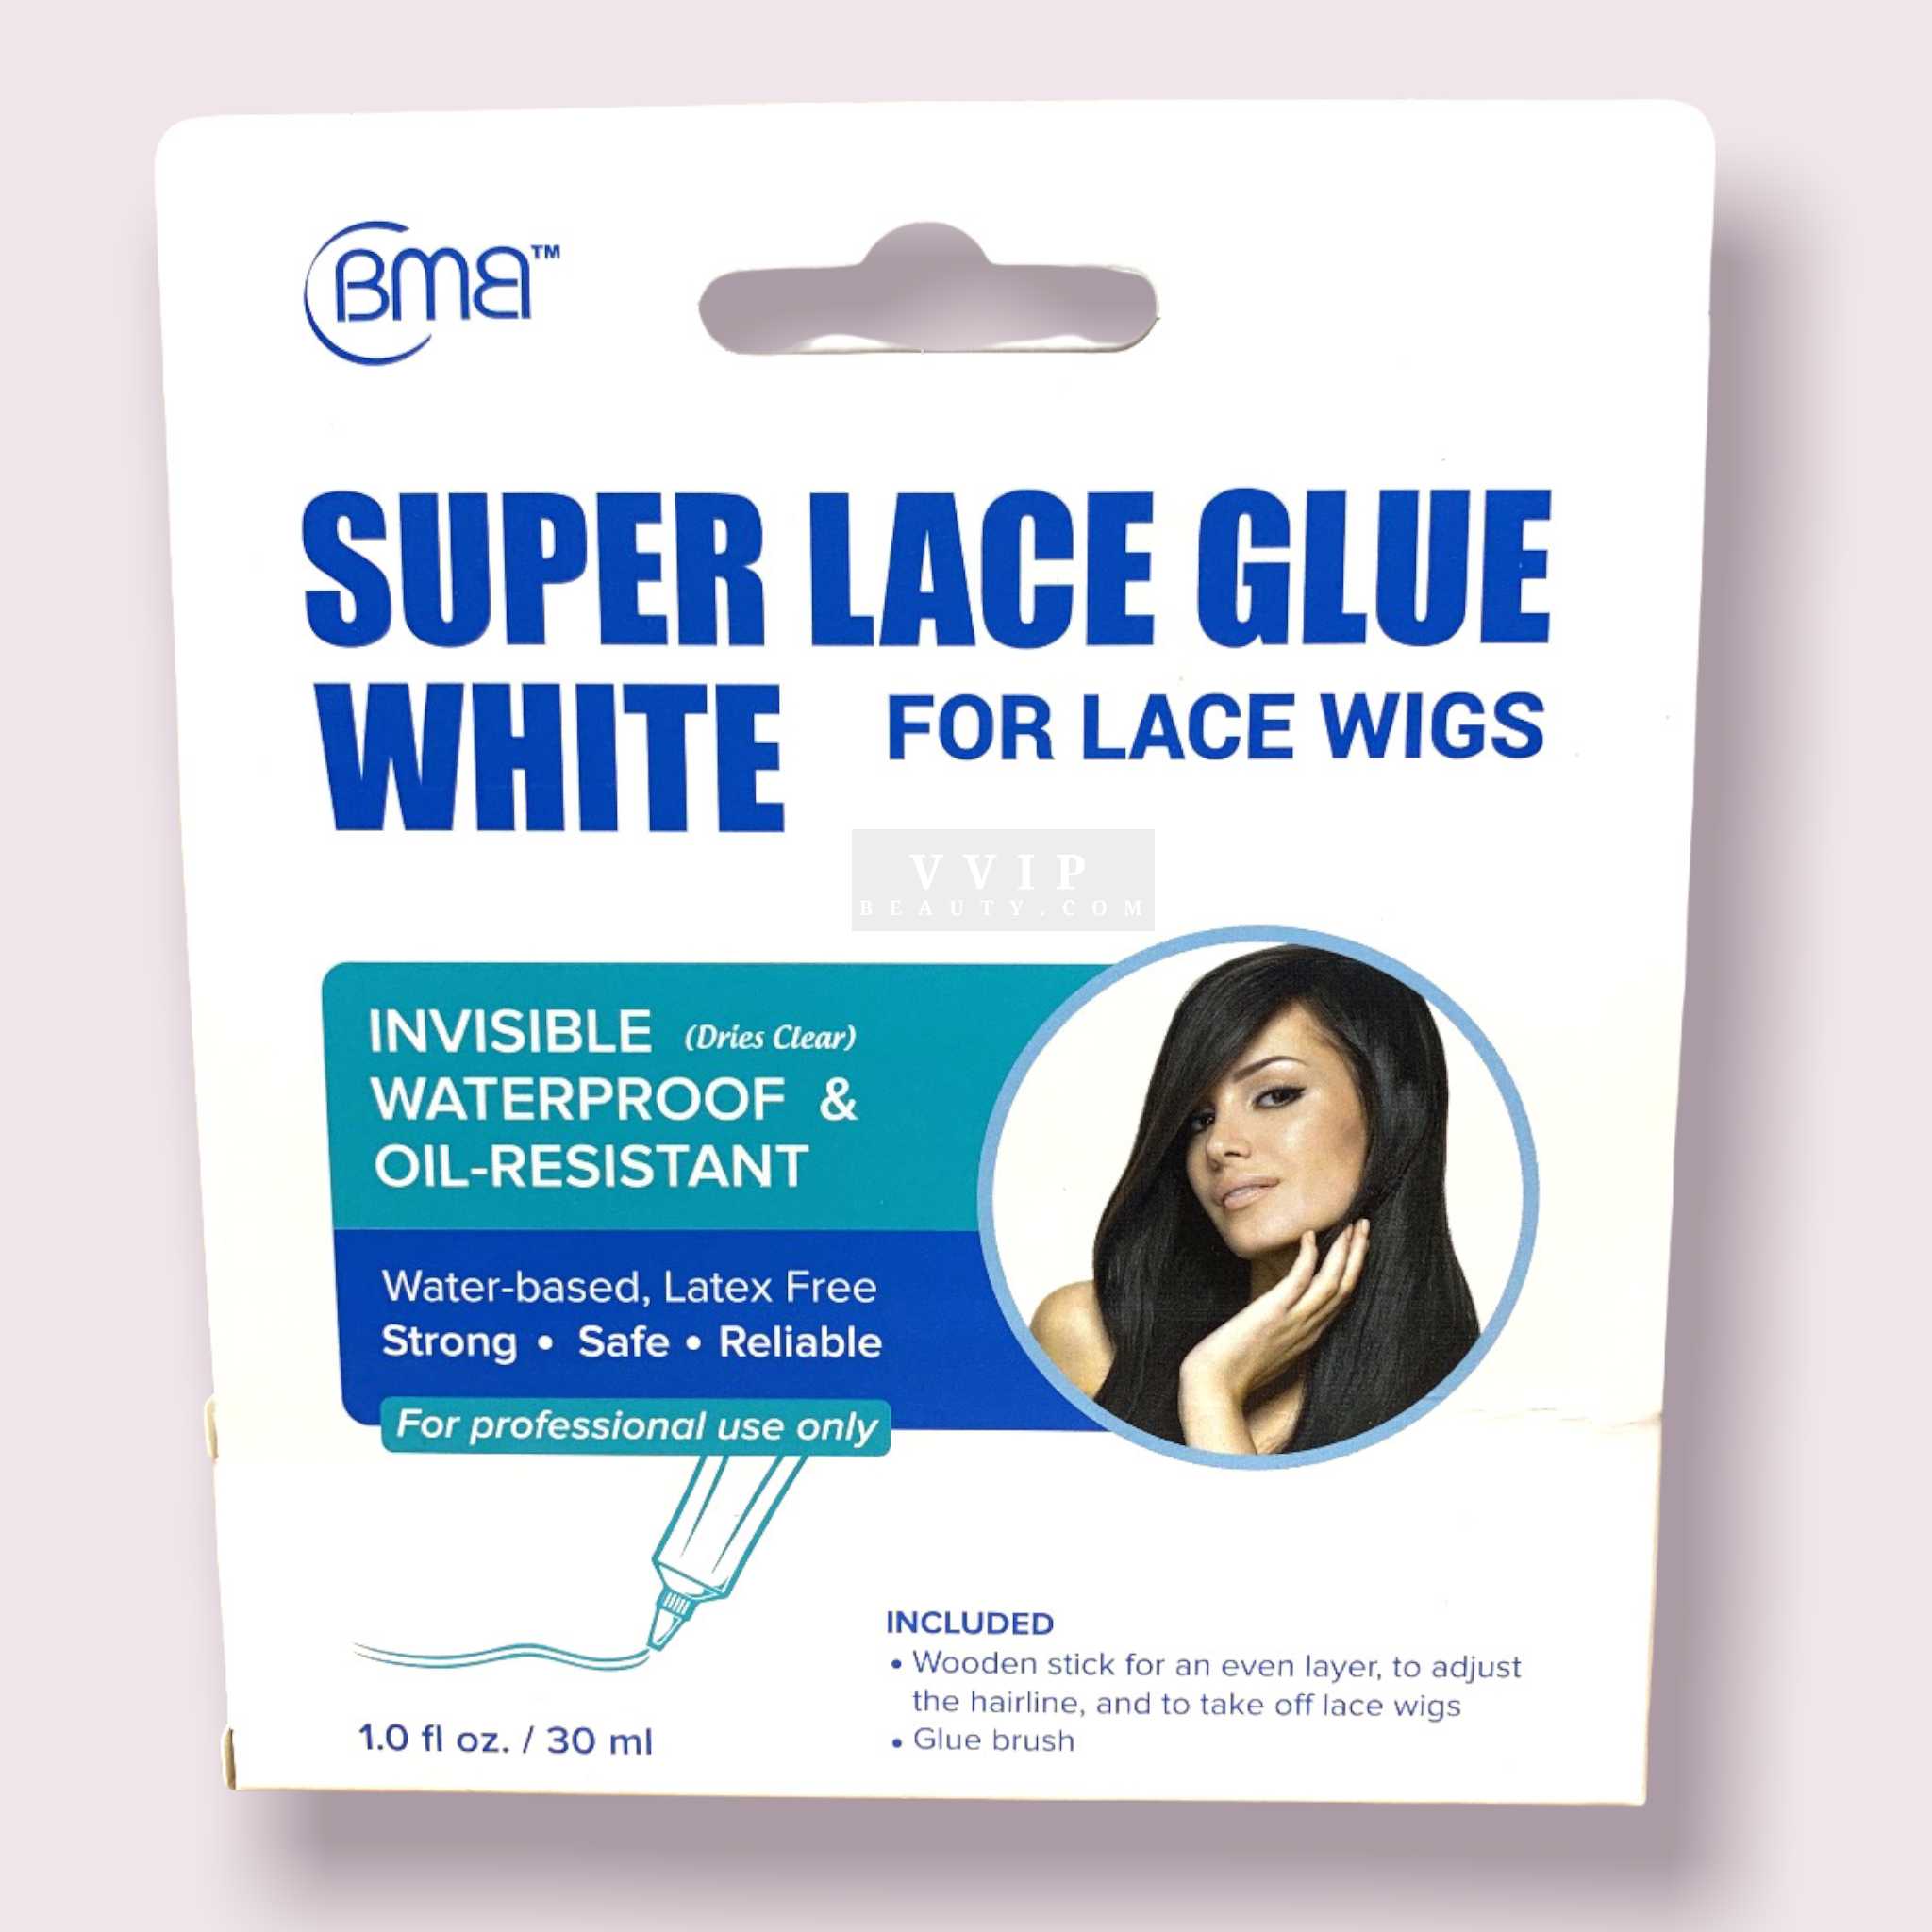 [BMB] Super Lace Glue for Lace Front Wigs Crazy Hold Tube 1.0 fl.oz